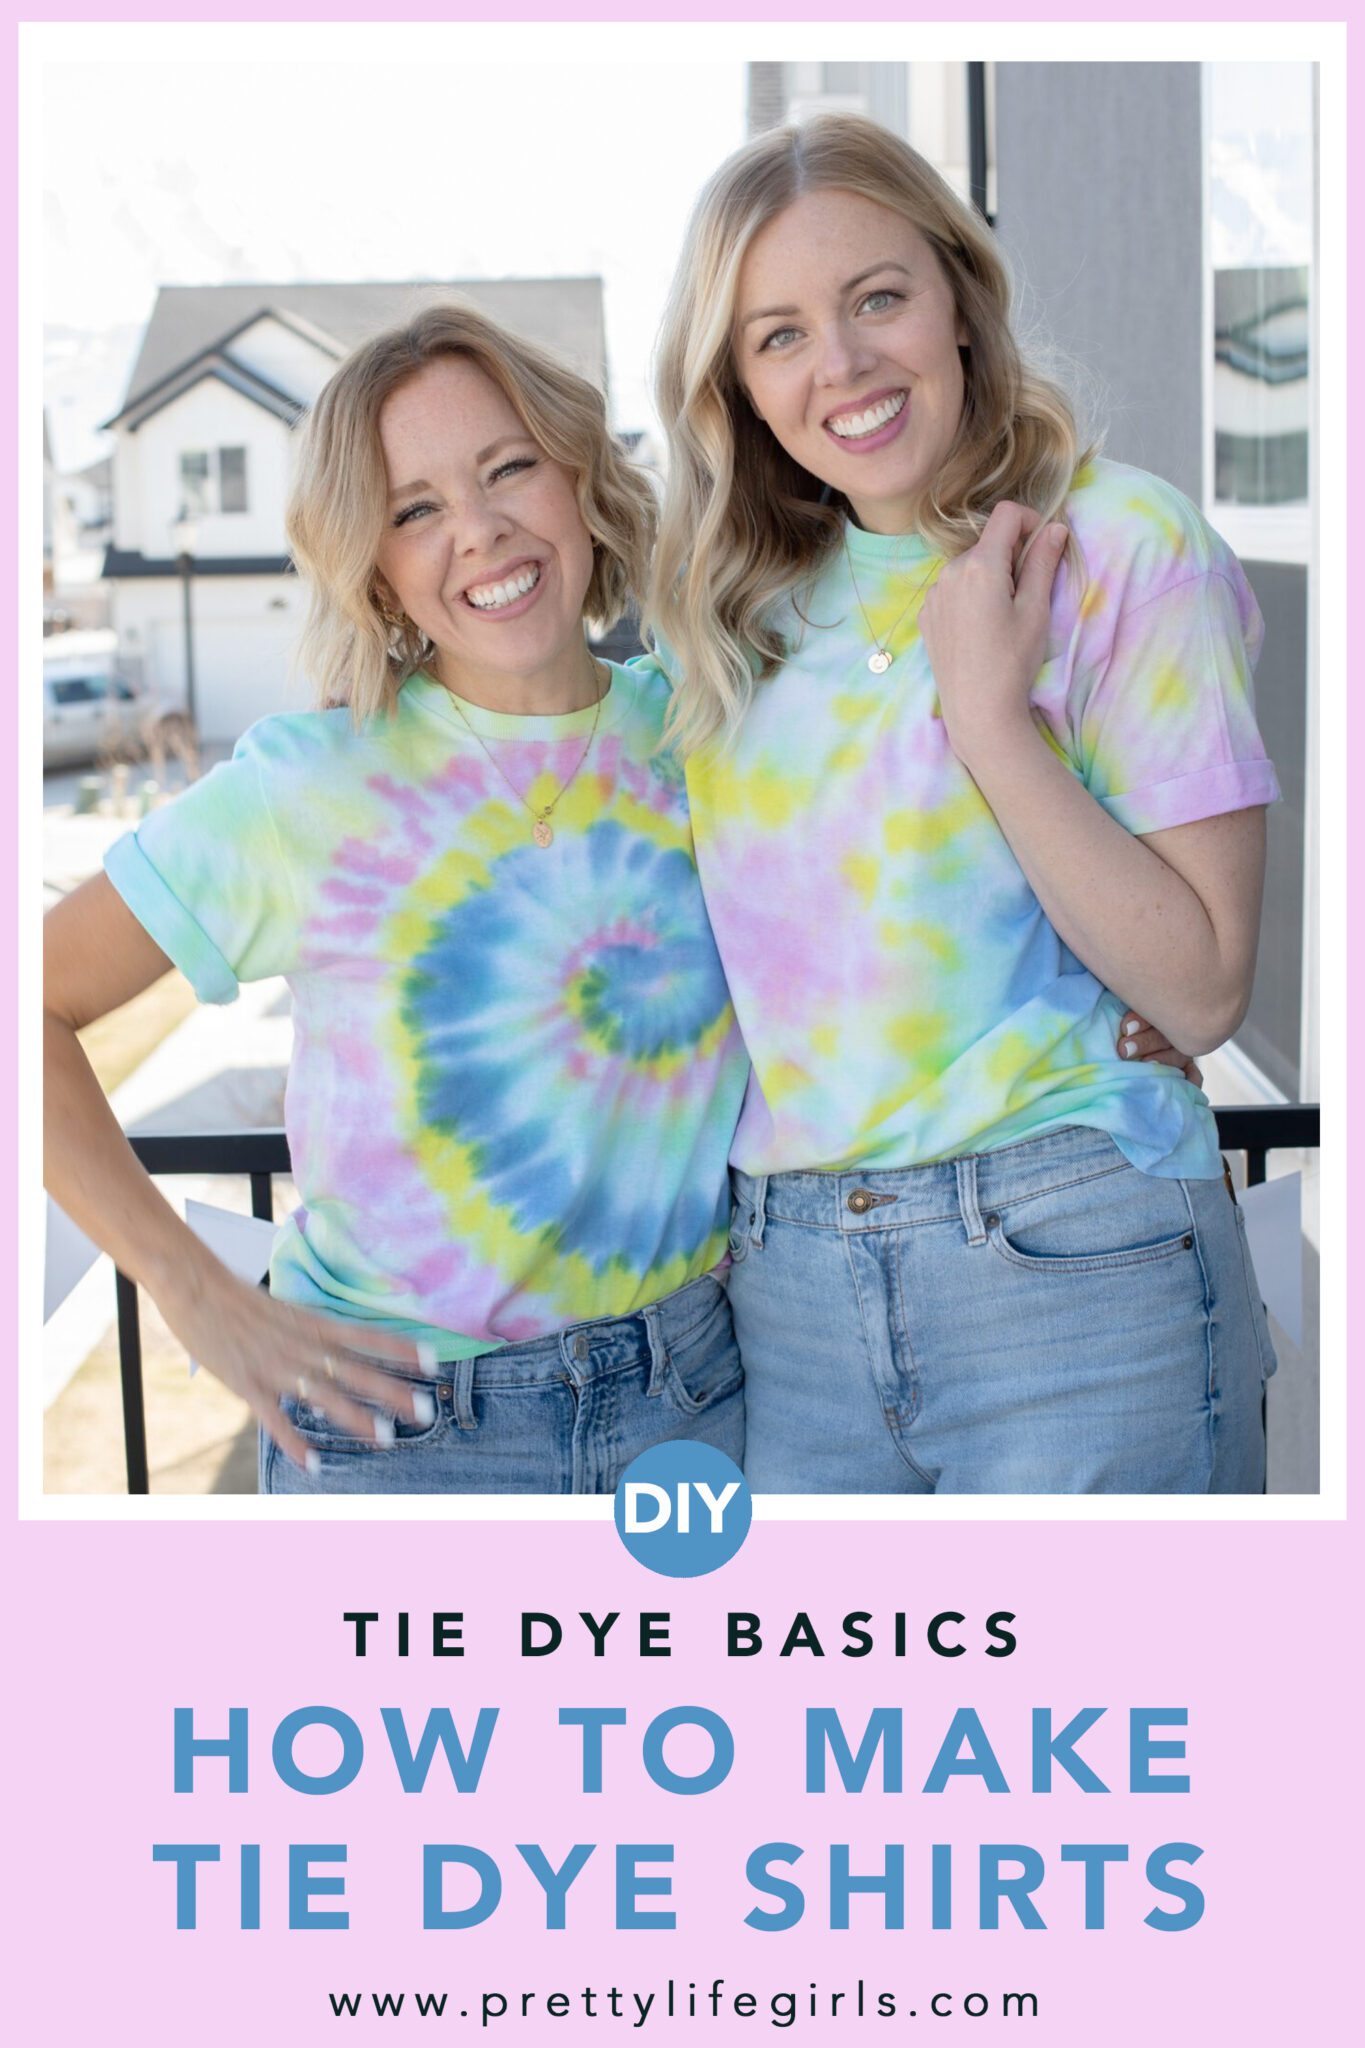 How to Tie Dye: Easy Steps for Beginners | The Pretty Life Girls